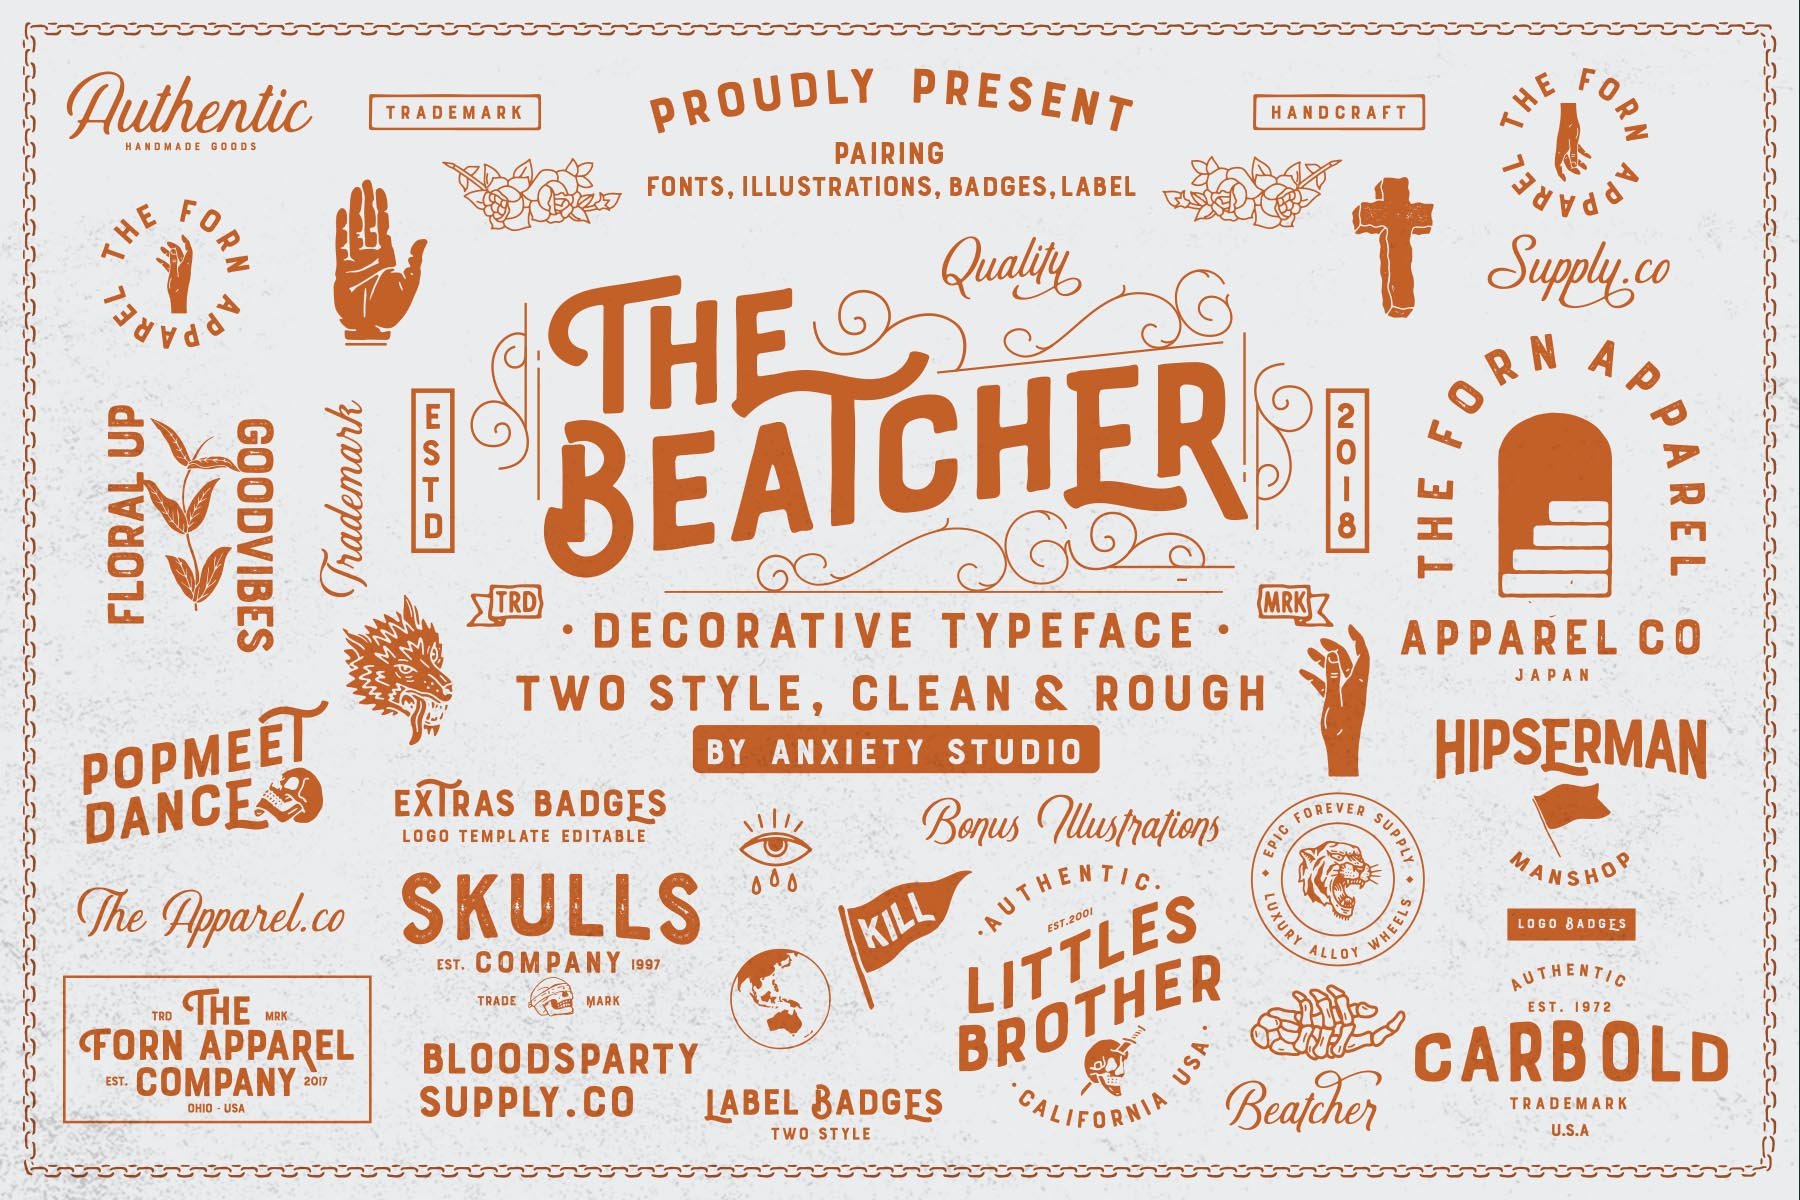 The Beatcher Typeface (Extras) cover image.